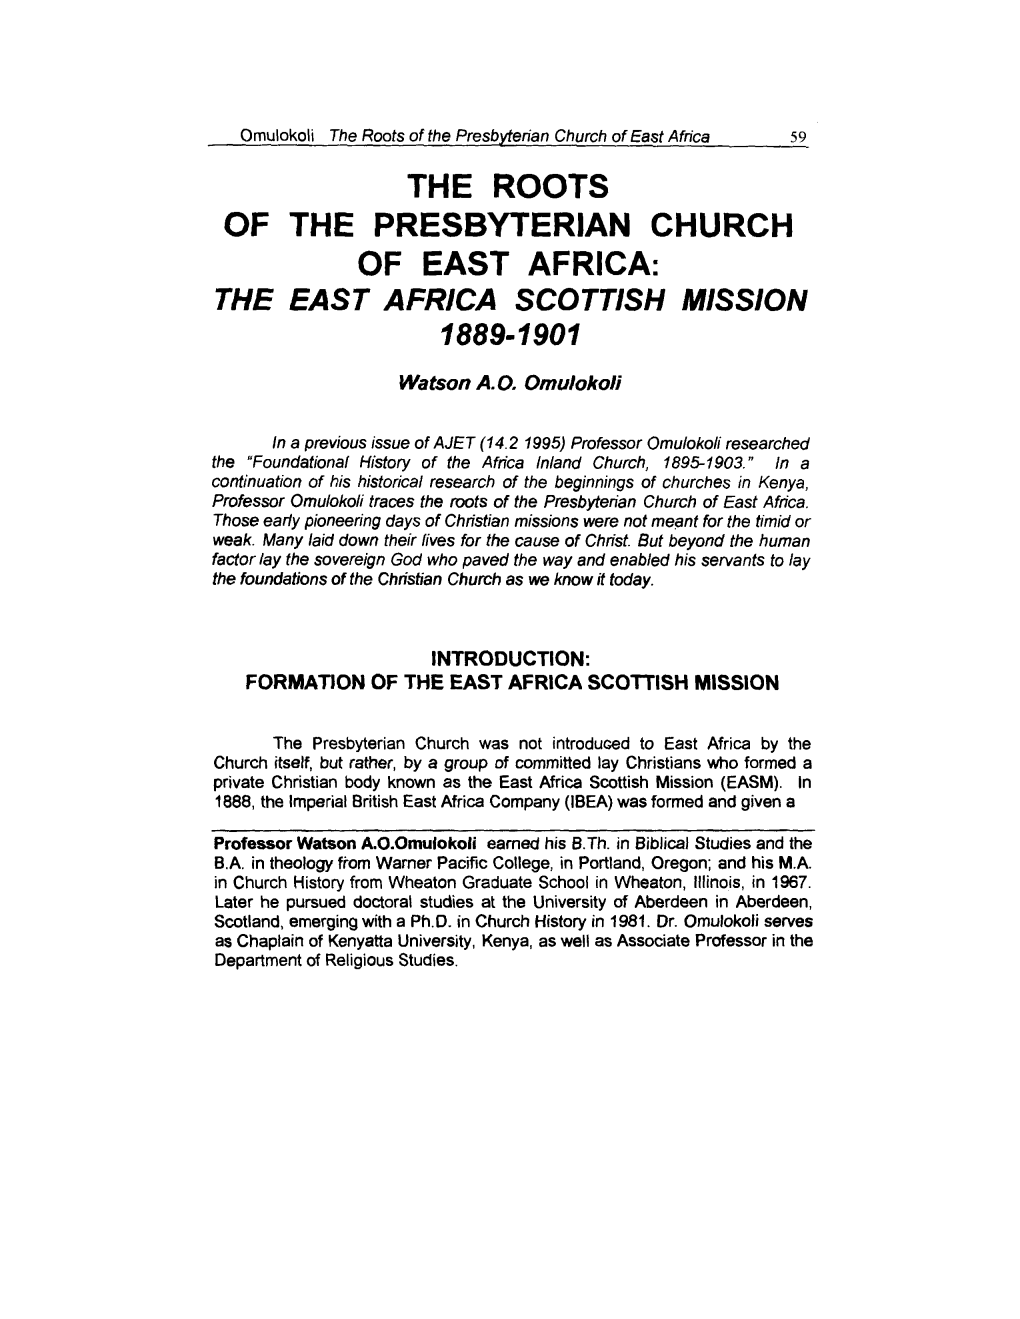 The Roots of the Presbyterian Church of East Africa: the East Africa Scottish Mission 1889-1901